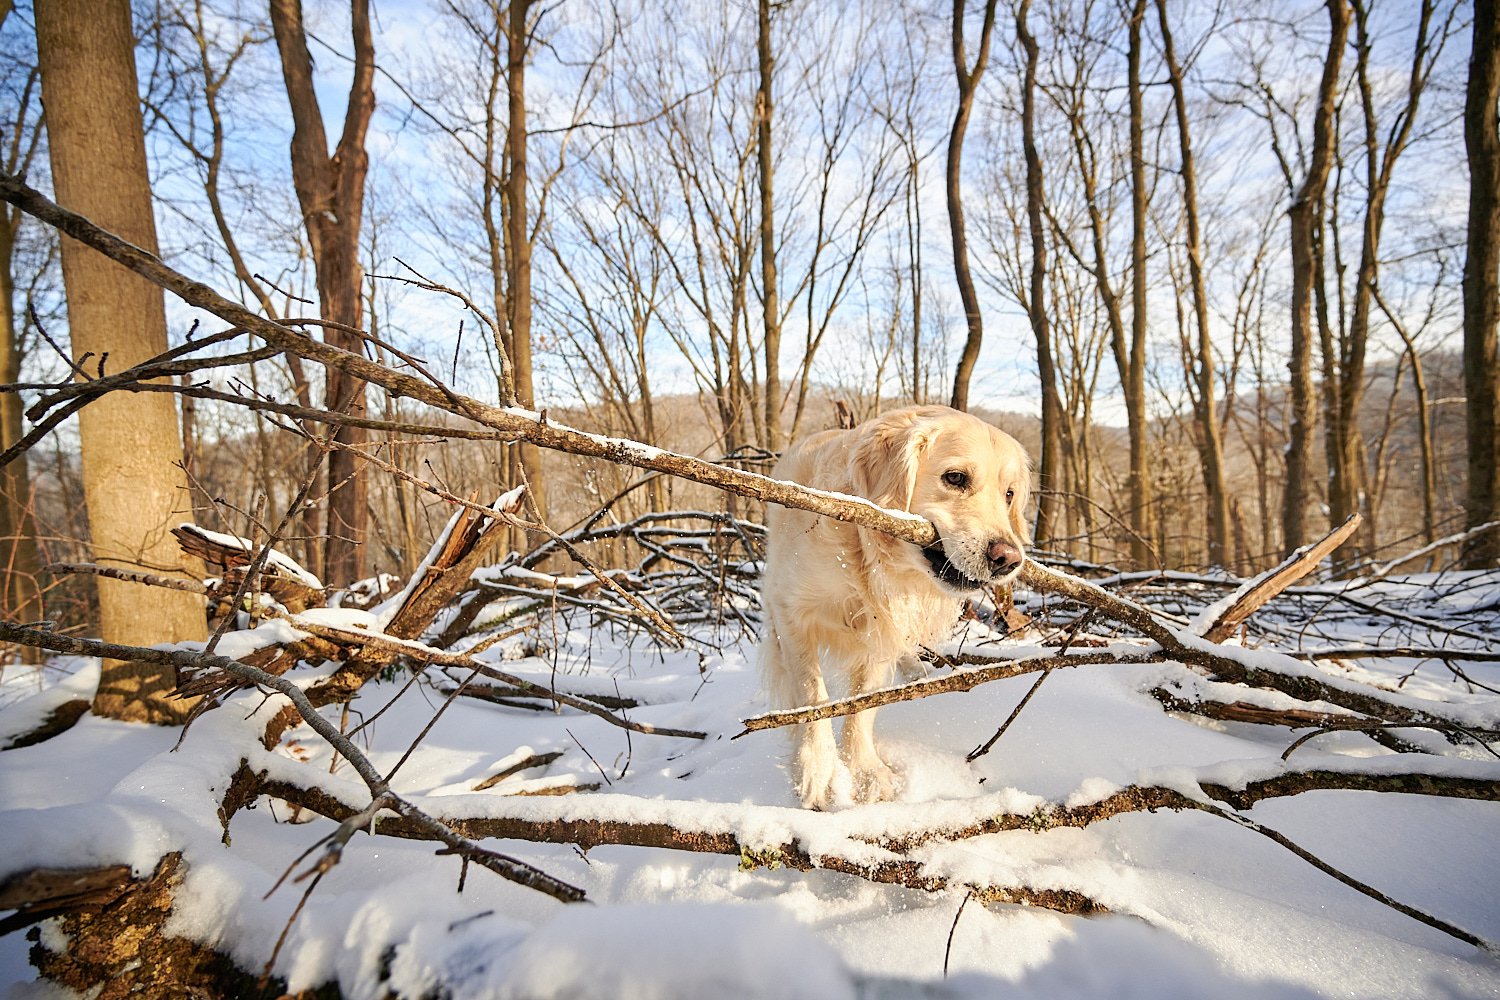  SEWICKLEY, PA, USA - FEBRUARY 7TH 2022: A 5-year old male Golden Retriever dog is hiking up the hills of Western Pennsylvania. The winter forest is covered in snow and the icicles shine in the sun. 